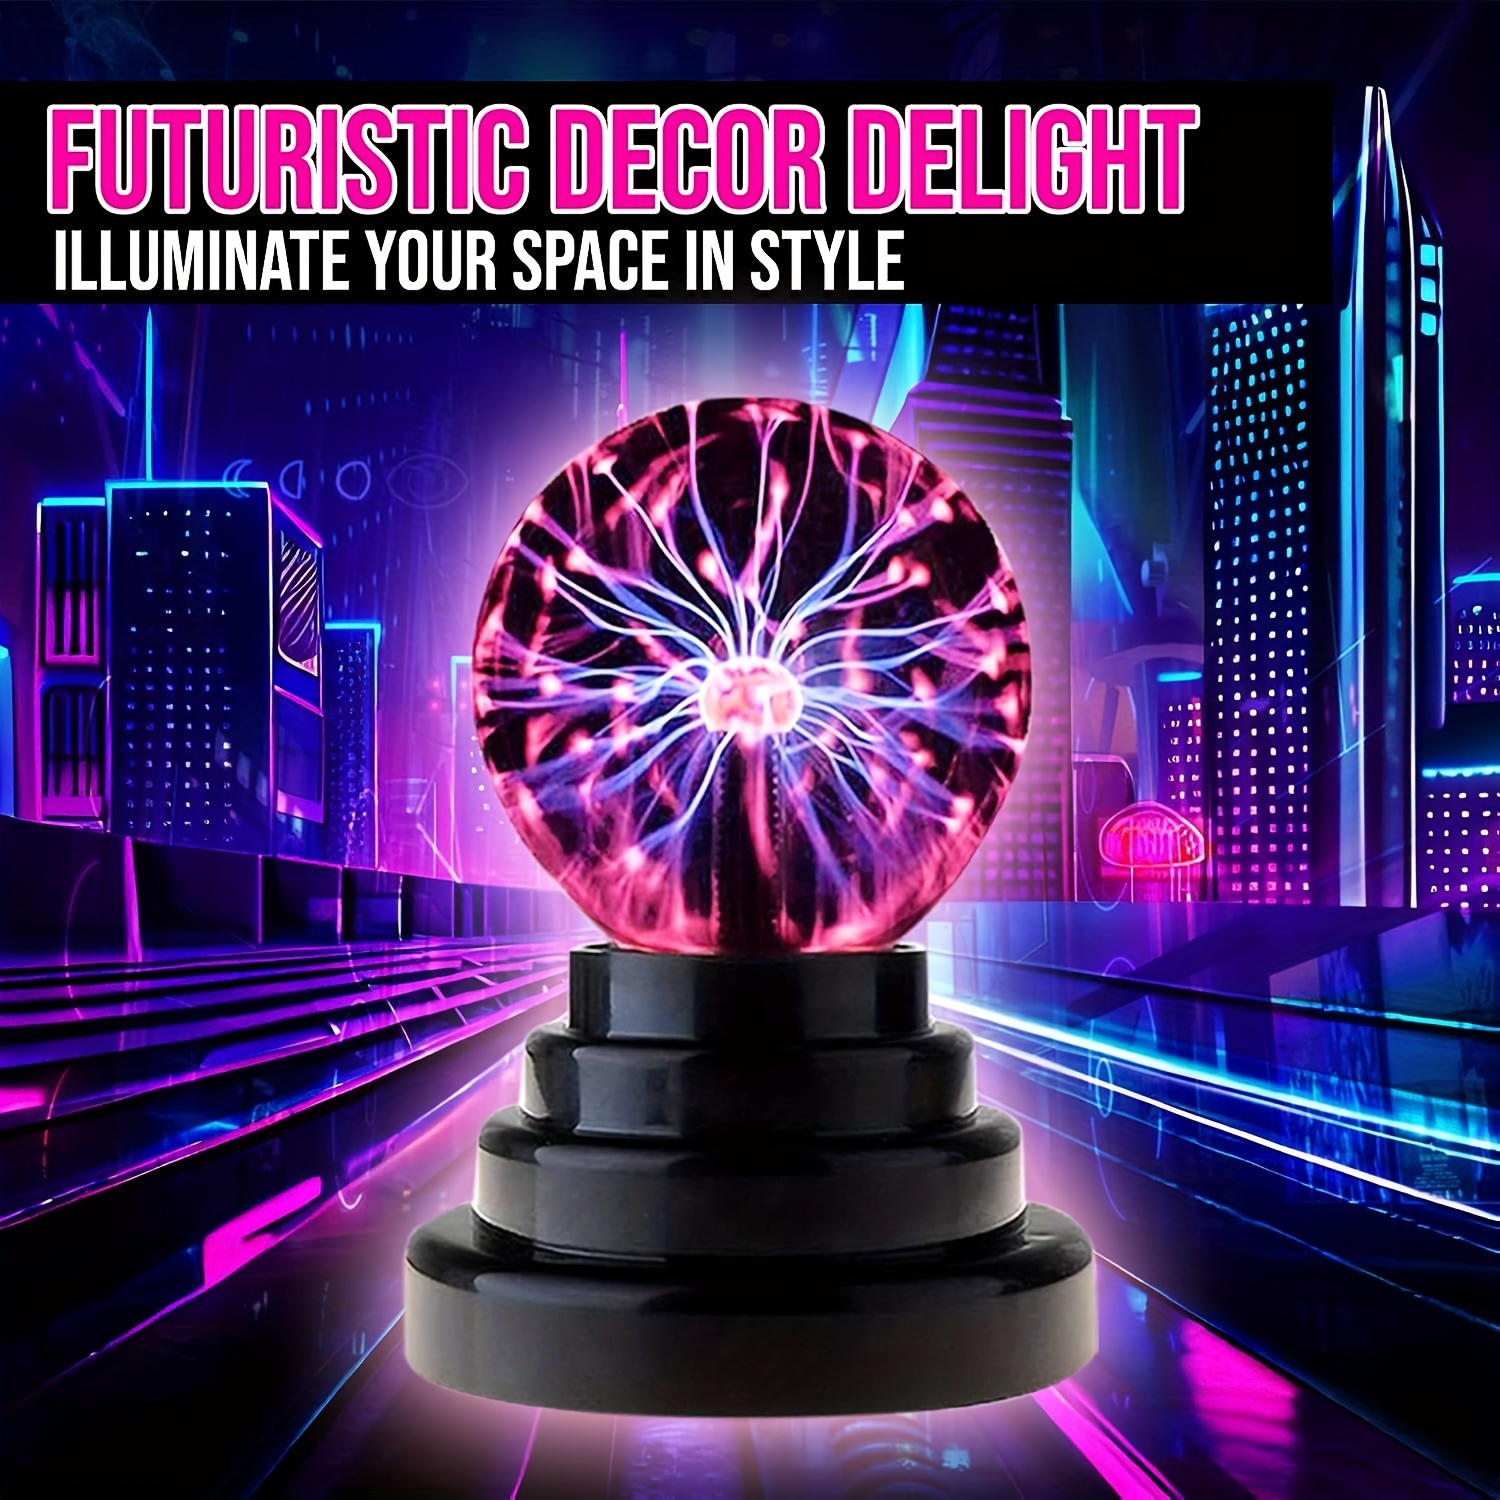 

1pc Plasma Lamp, To Show A Fascinating Light Effect, With Unique Design, Adjustable Brightness, Suitable For Home Decoration, Party Atmosphere And Other Occasions To Make Life More Colorful.